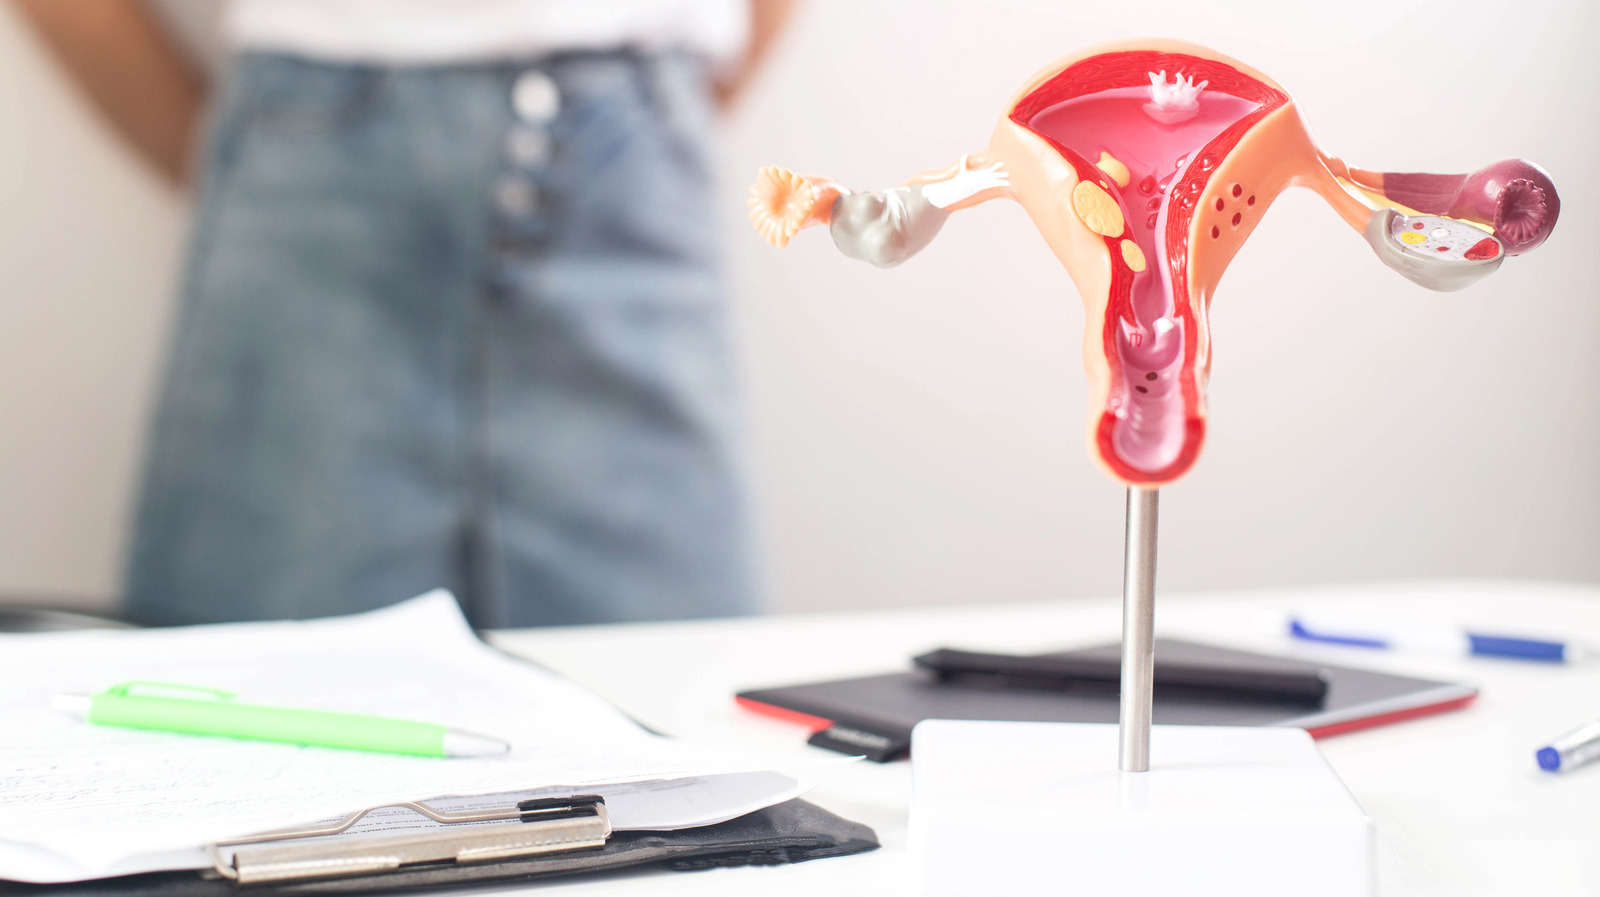 The Real Reason Doctors Ask About Your Menstrual Cycle